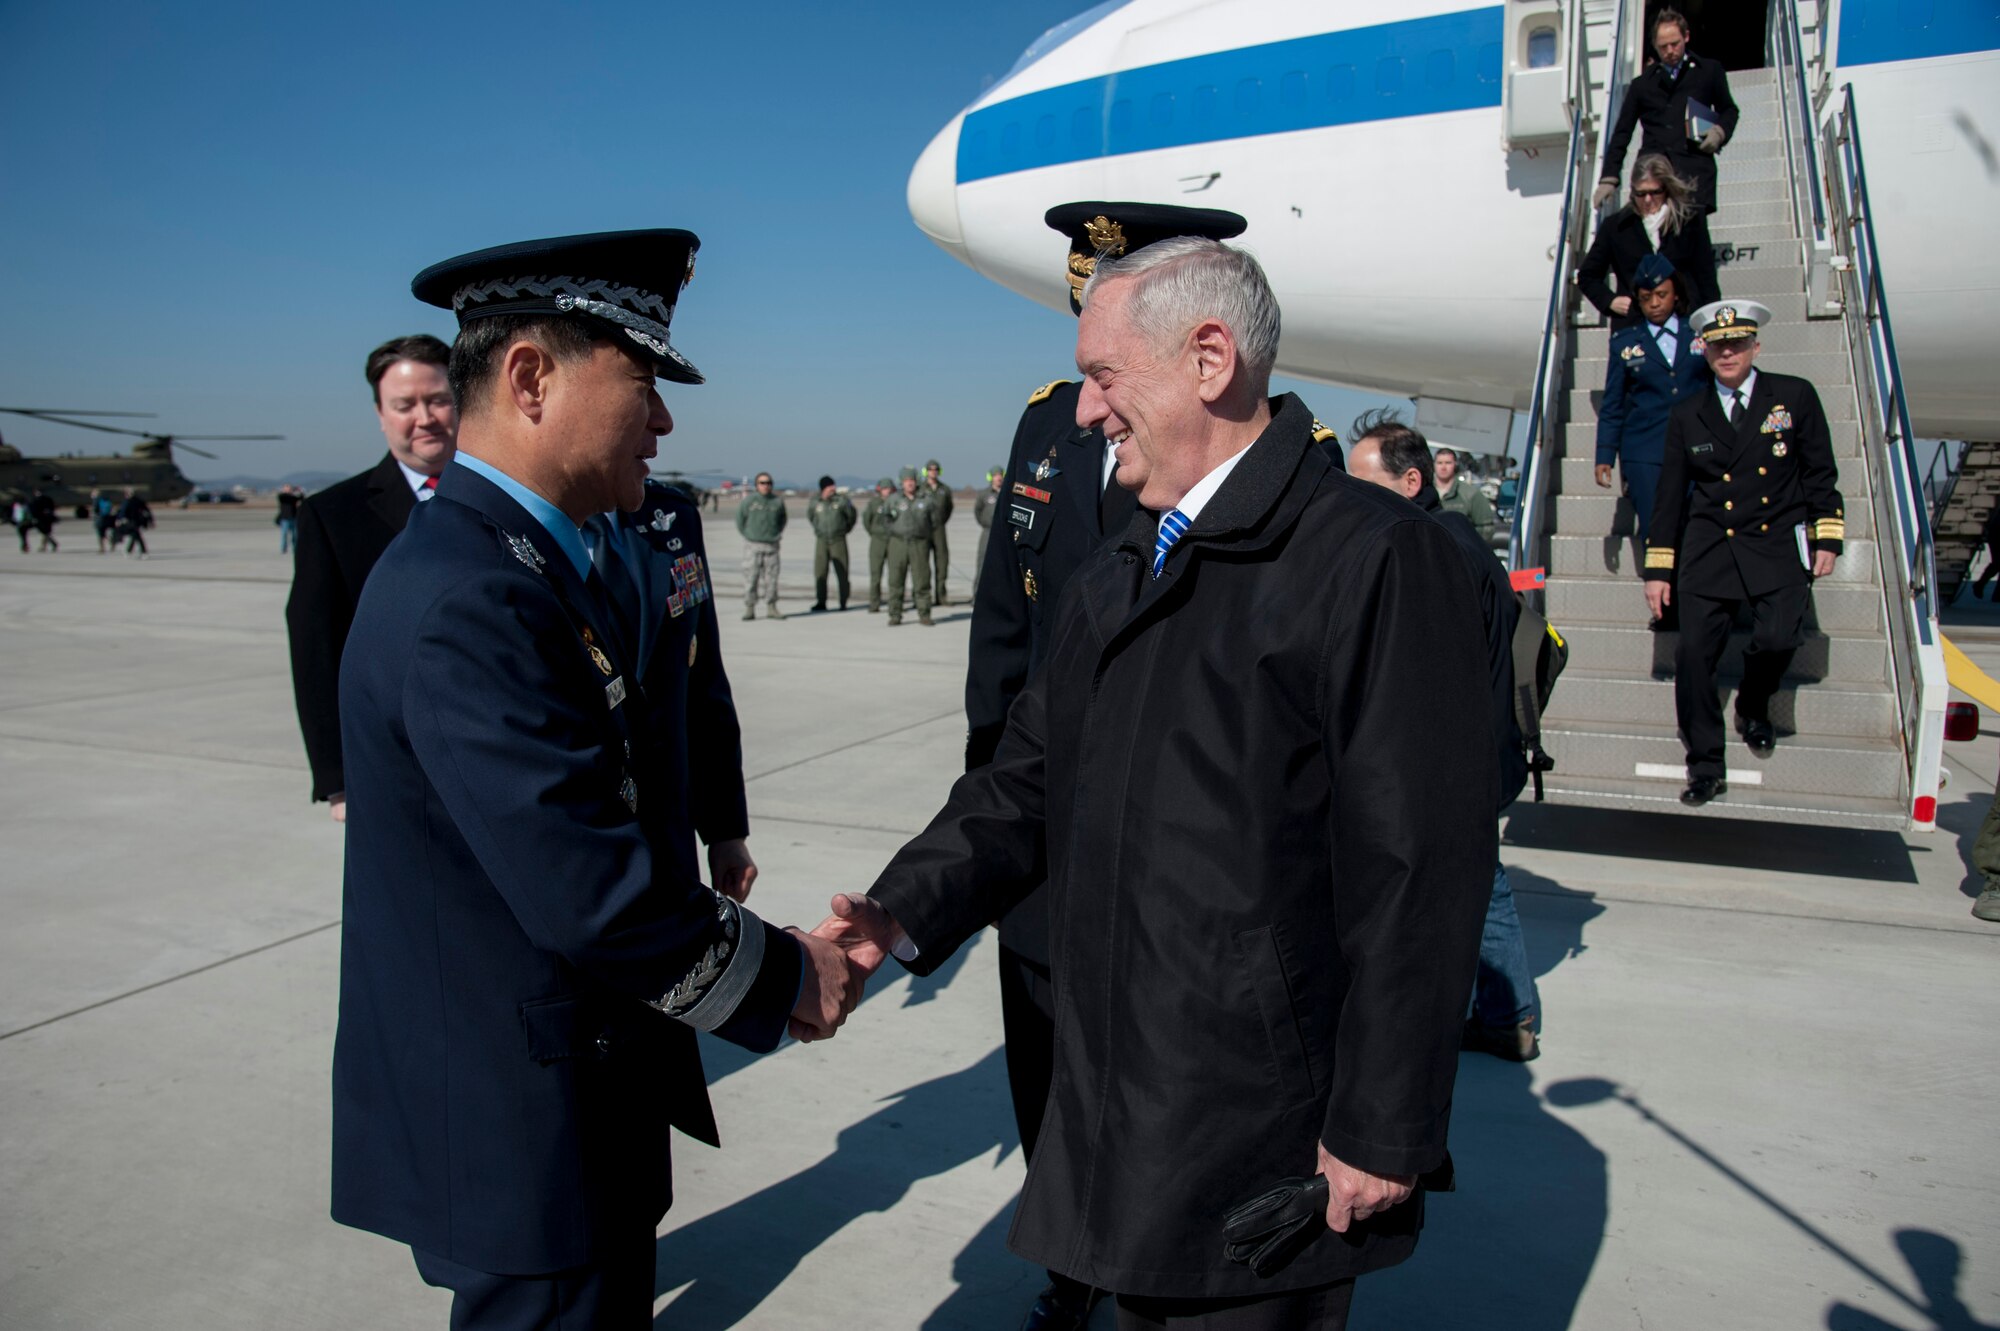 Defense Secretary Jim Mattis greets ROK air force Lt. Gen. Won, In-Choul, ROKAF Operations Command commander, as he arrives at Osan Air Base, Republic of Korea, Feb. 2, 2017. Mattis’ visit to the ROK, the first such visit in his tenure as secretary of defense, comes in light of a year of strong provocations from North Korea, affirming the ironclad commitment the U.S. has in strengthening its robust alliance with the ROK. (U.S. Air Force photo by Staff Sgt. Jonathan Steffen)